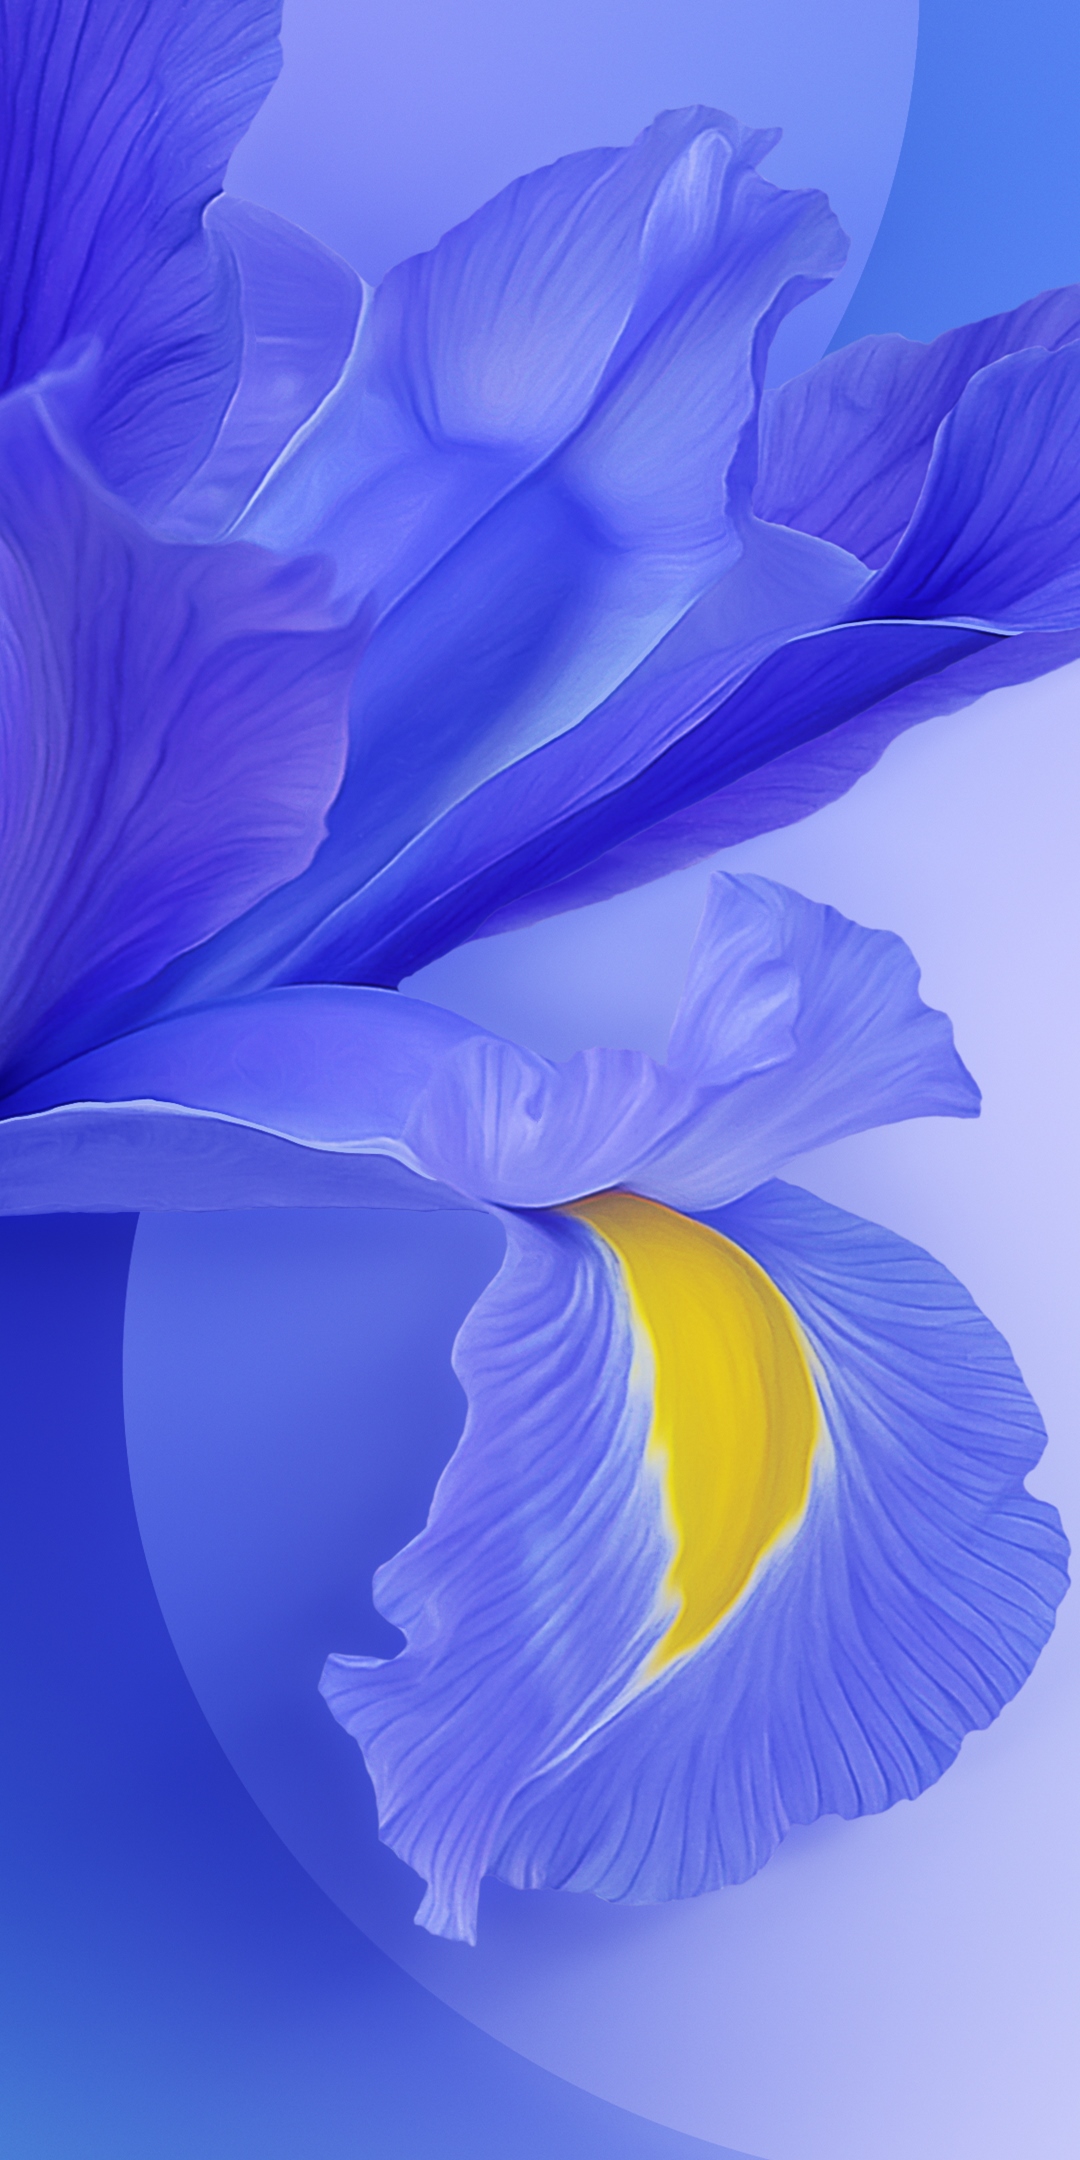 Download Xiaomi Mi 9 Wallpapers to customize your old ...